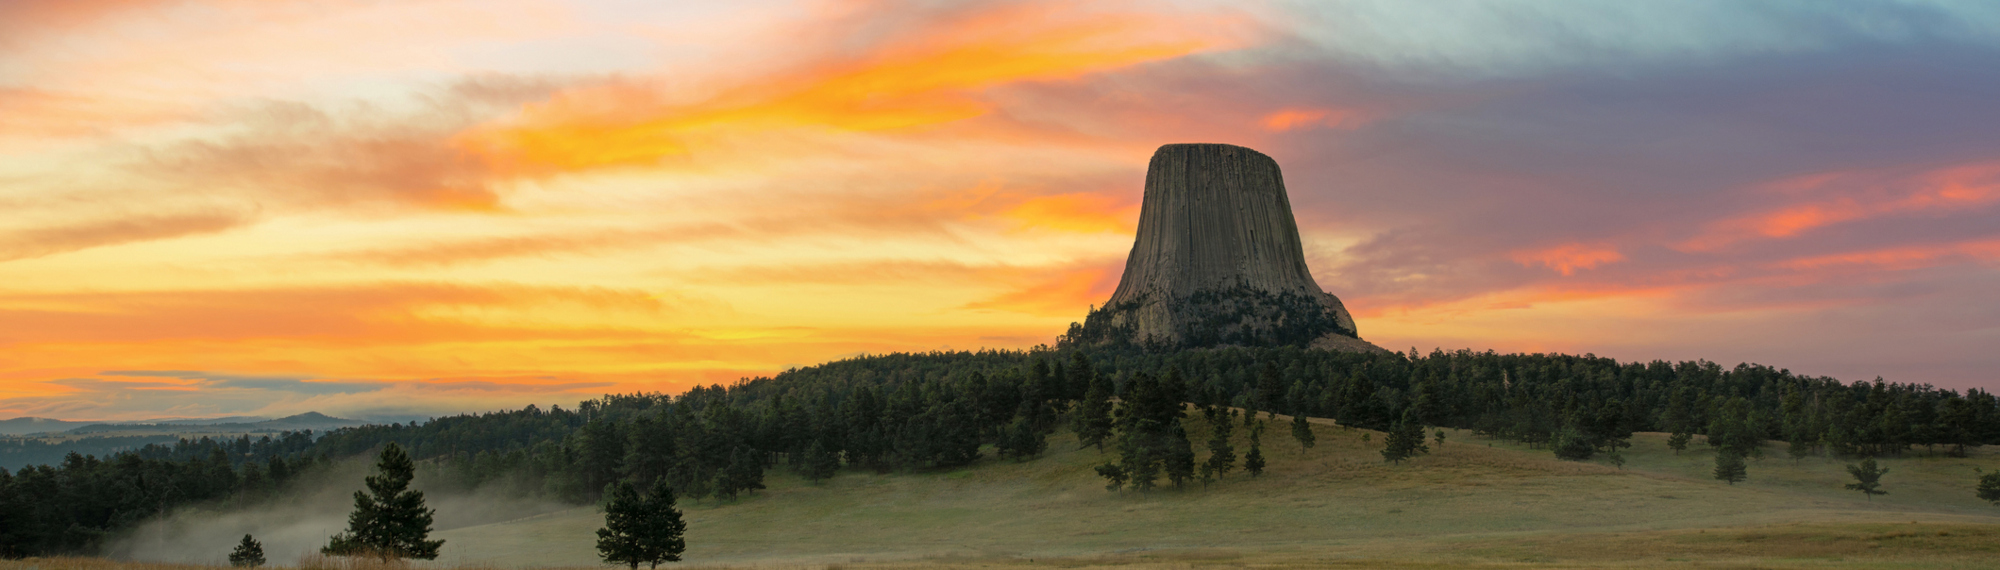 Landscape to depict online poker in Wyoming